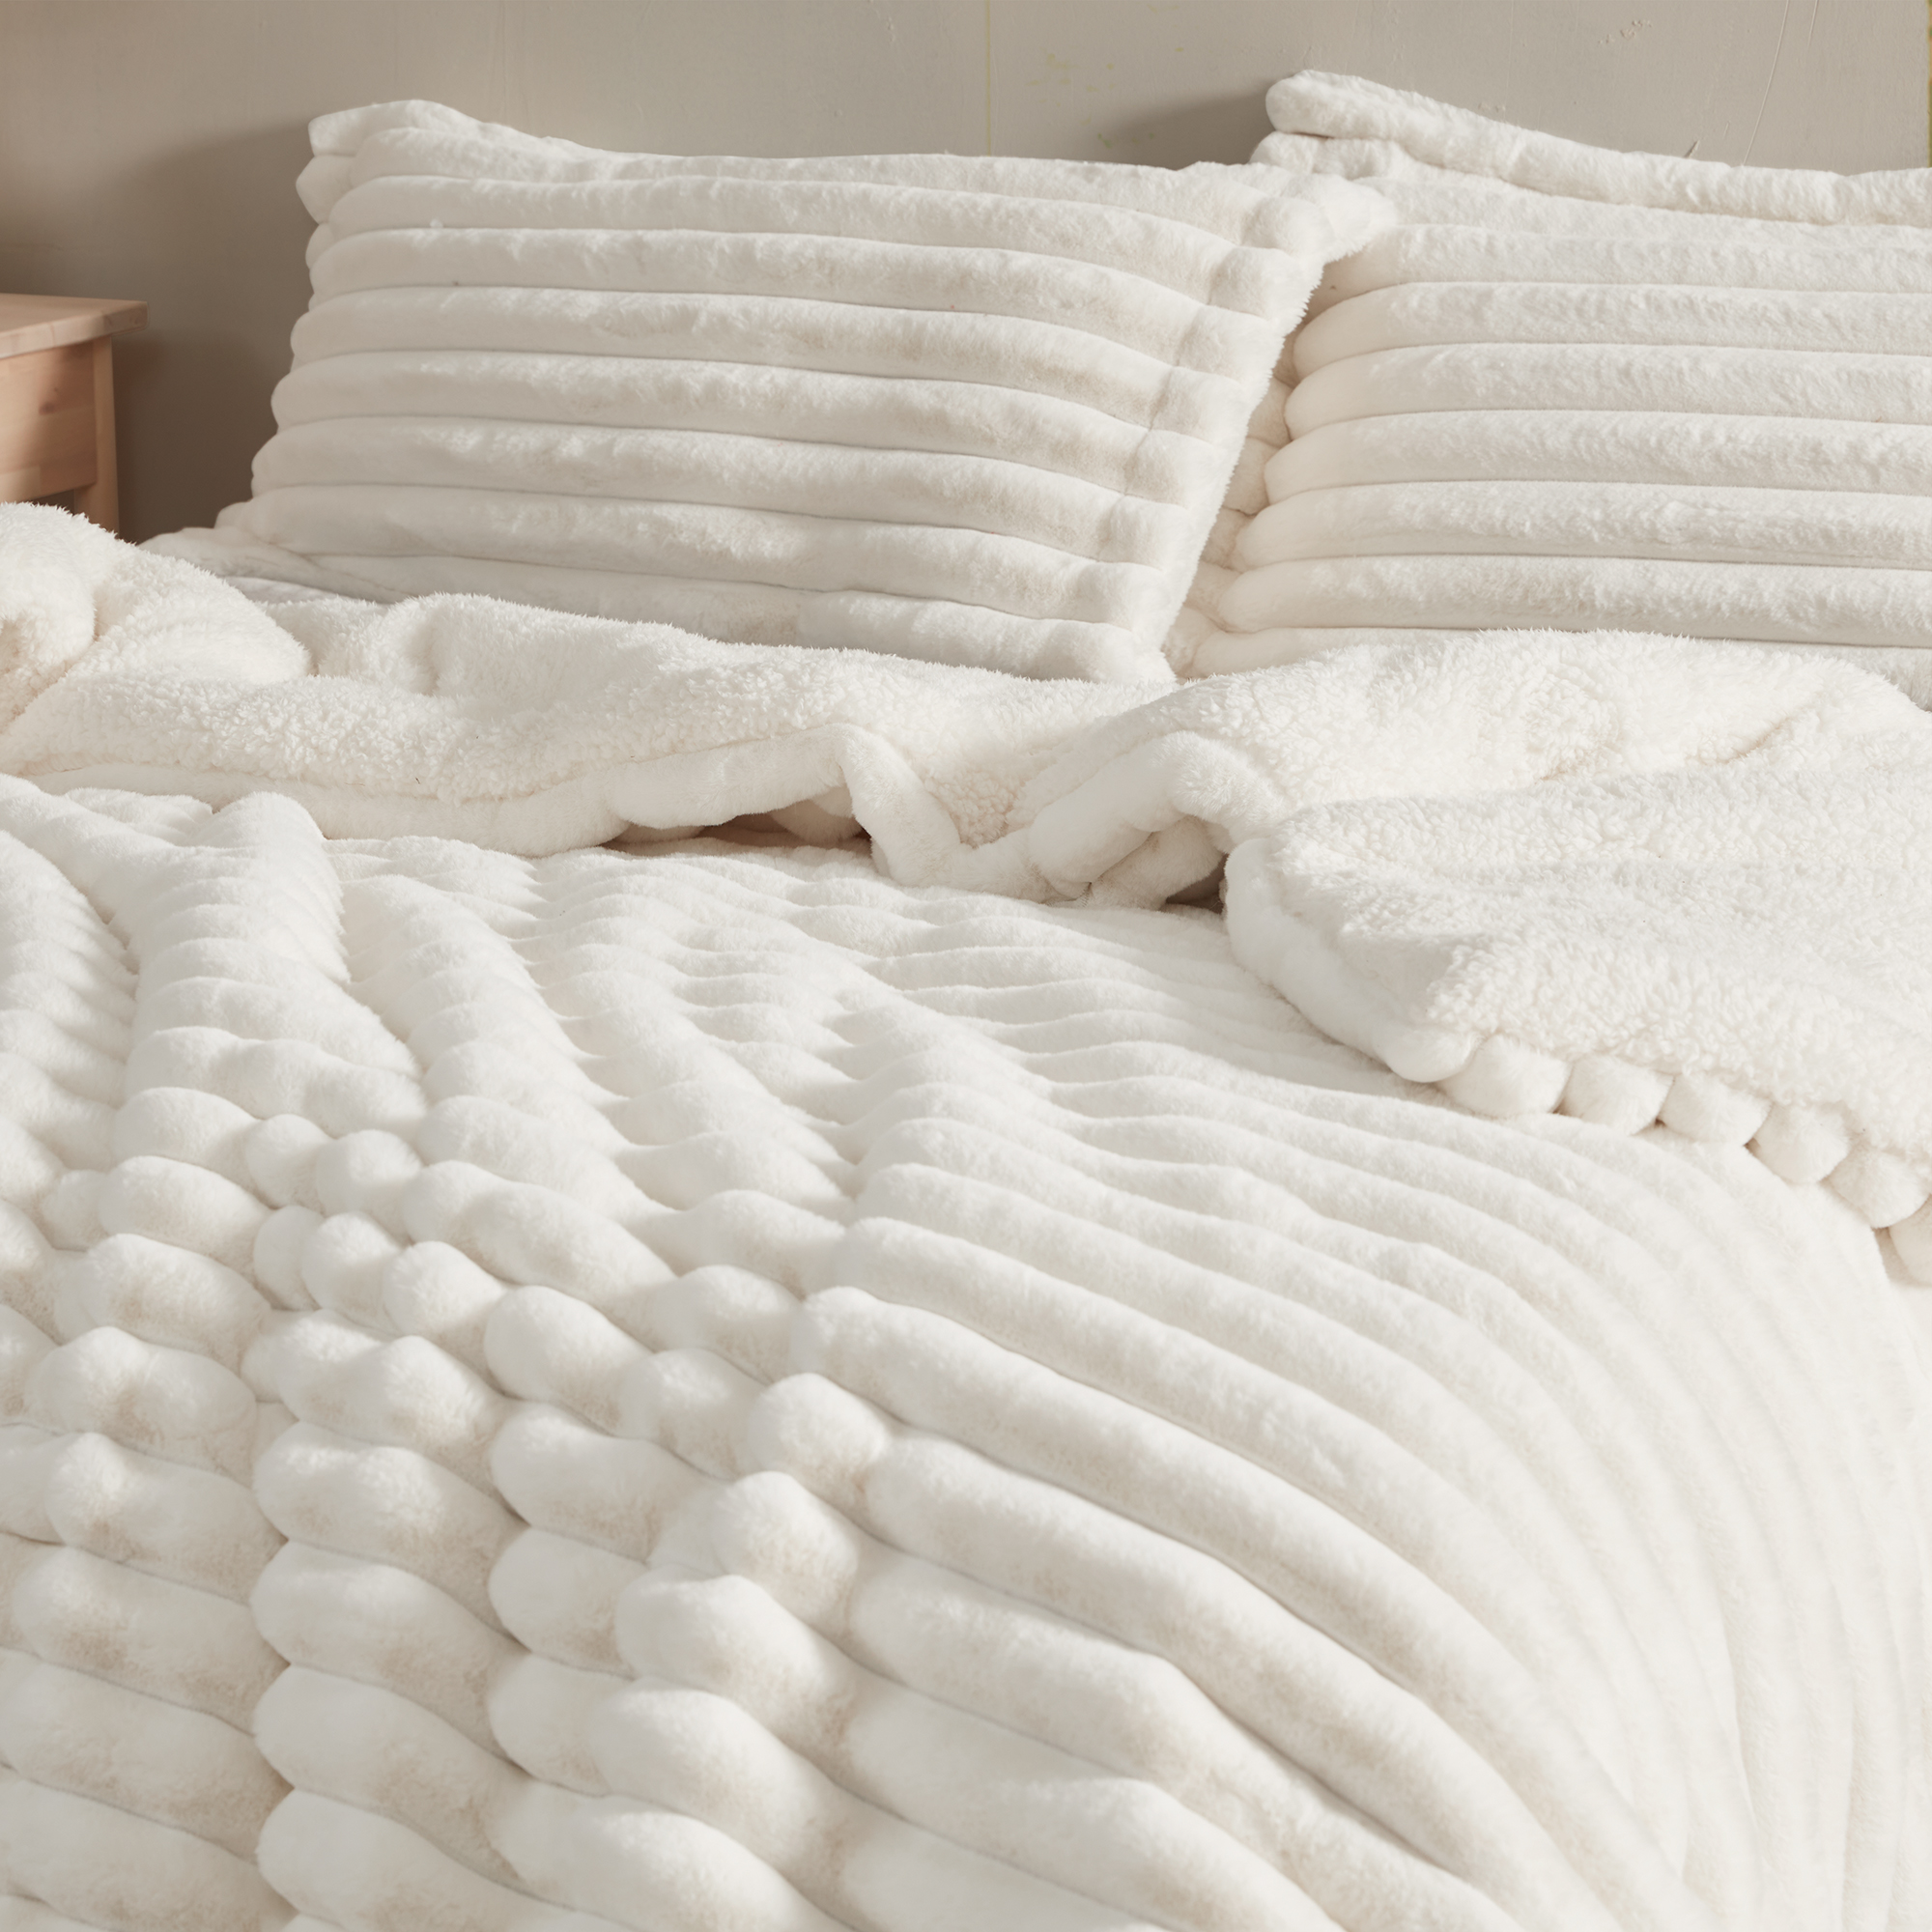 Roll Cakes Chunky Bunny - Coma Inducer Oversized Comforter - Cream